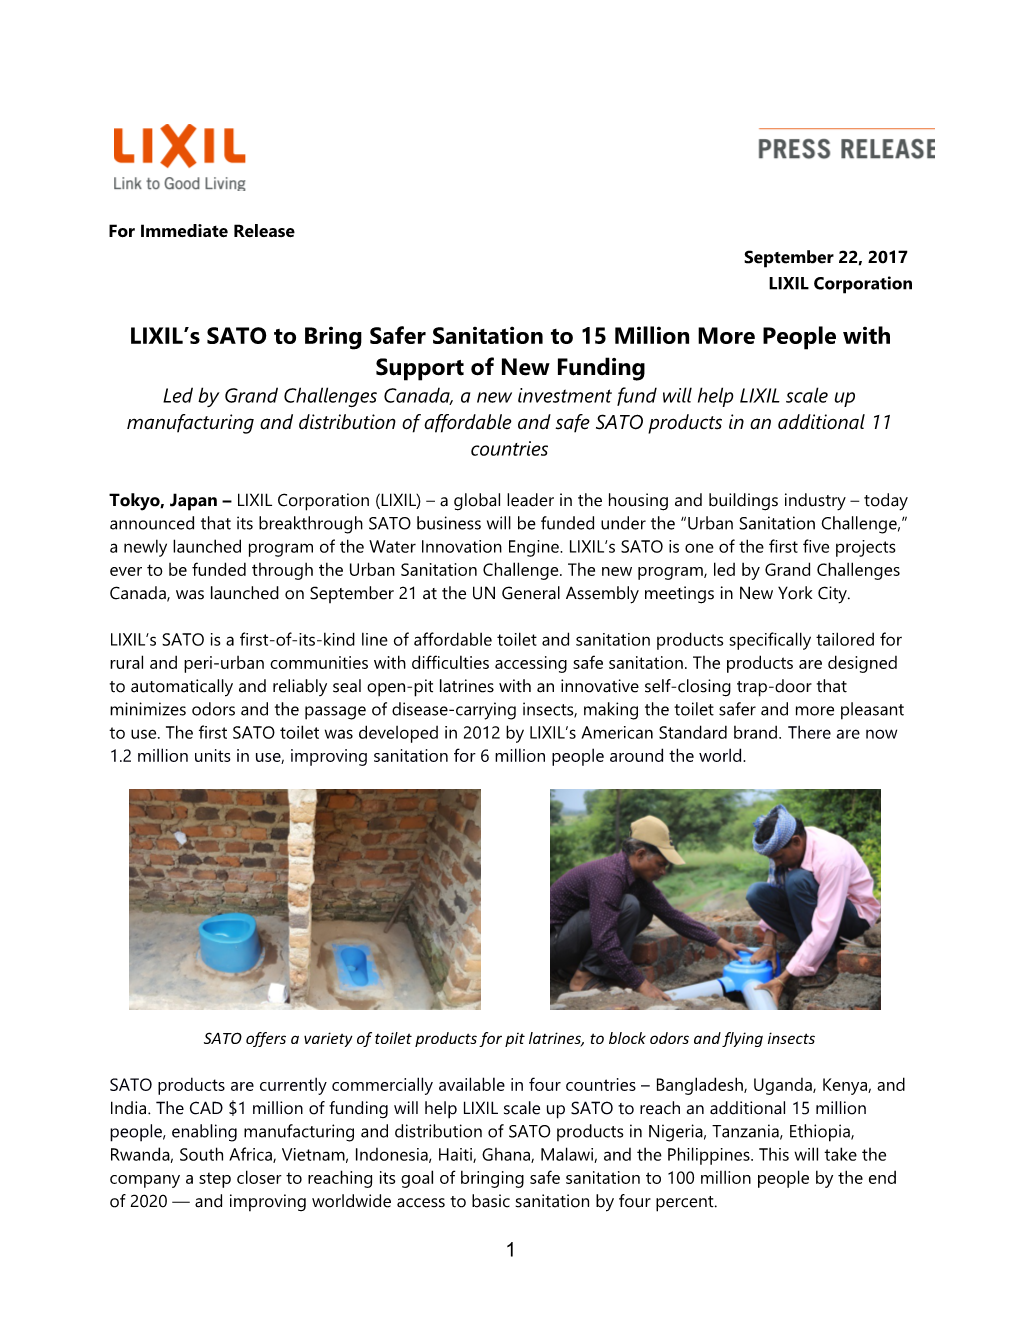 LIXIL S SATO to Bring Safer Sanitation to 15 Millionmore People Withsupport of New Funding